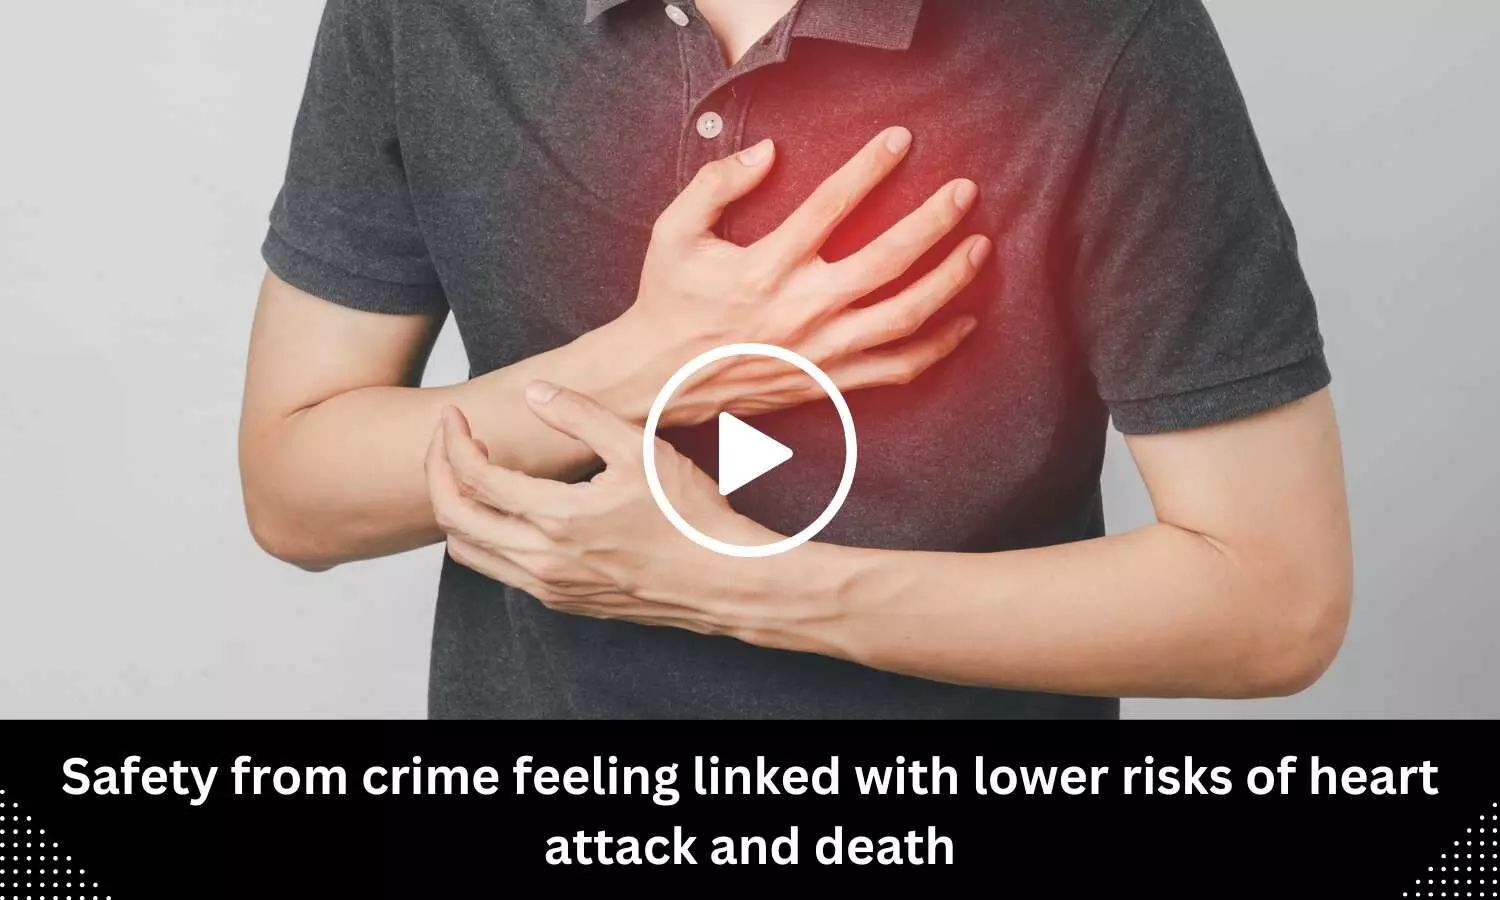 Safety from crime feeling linked with lower risks of heart attack and death